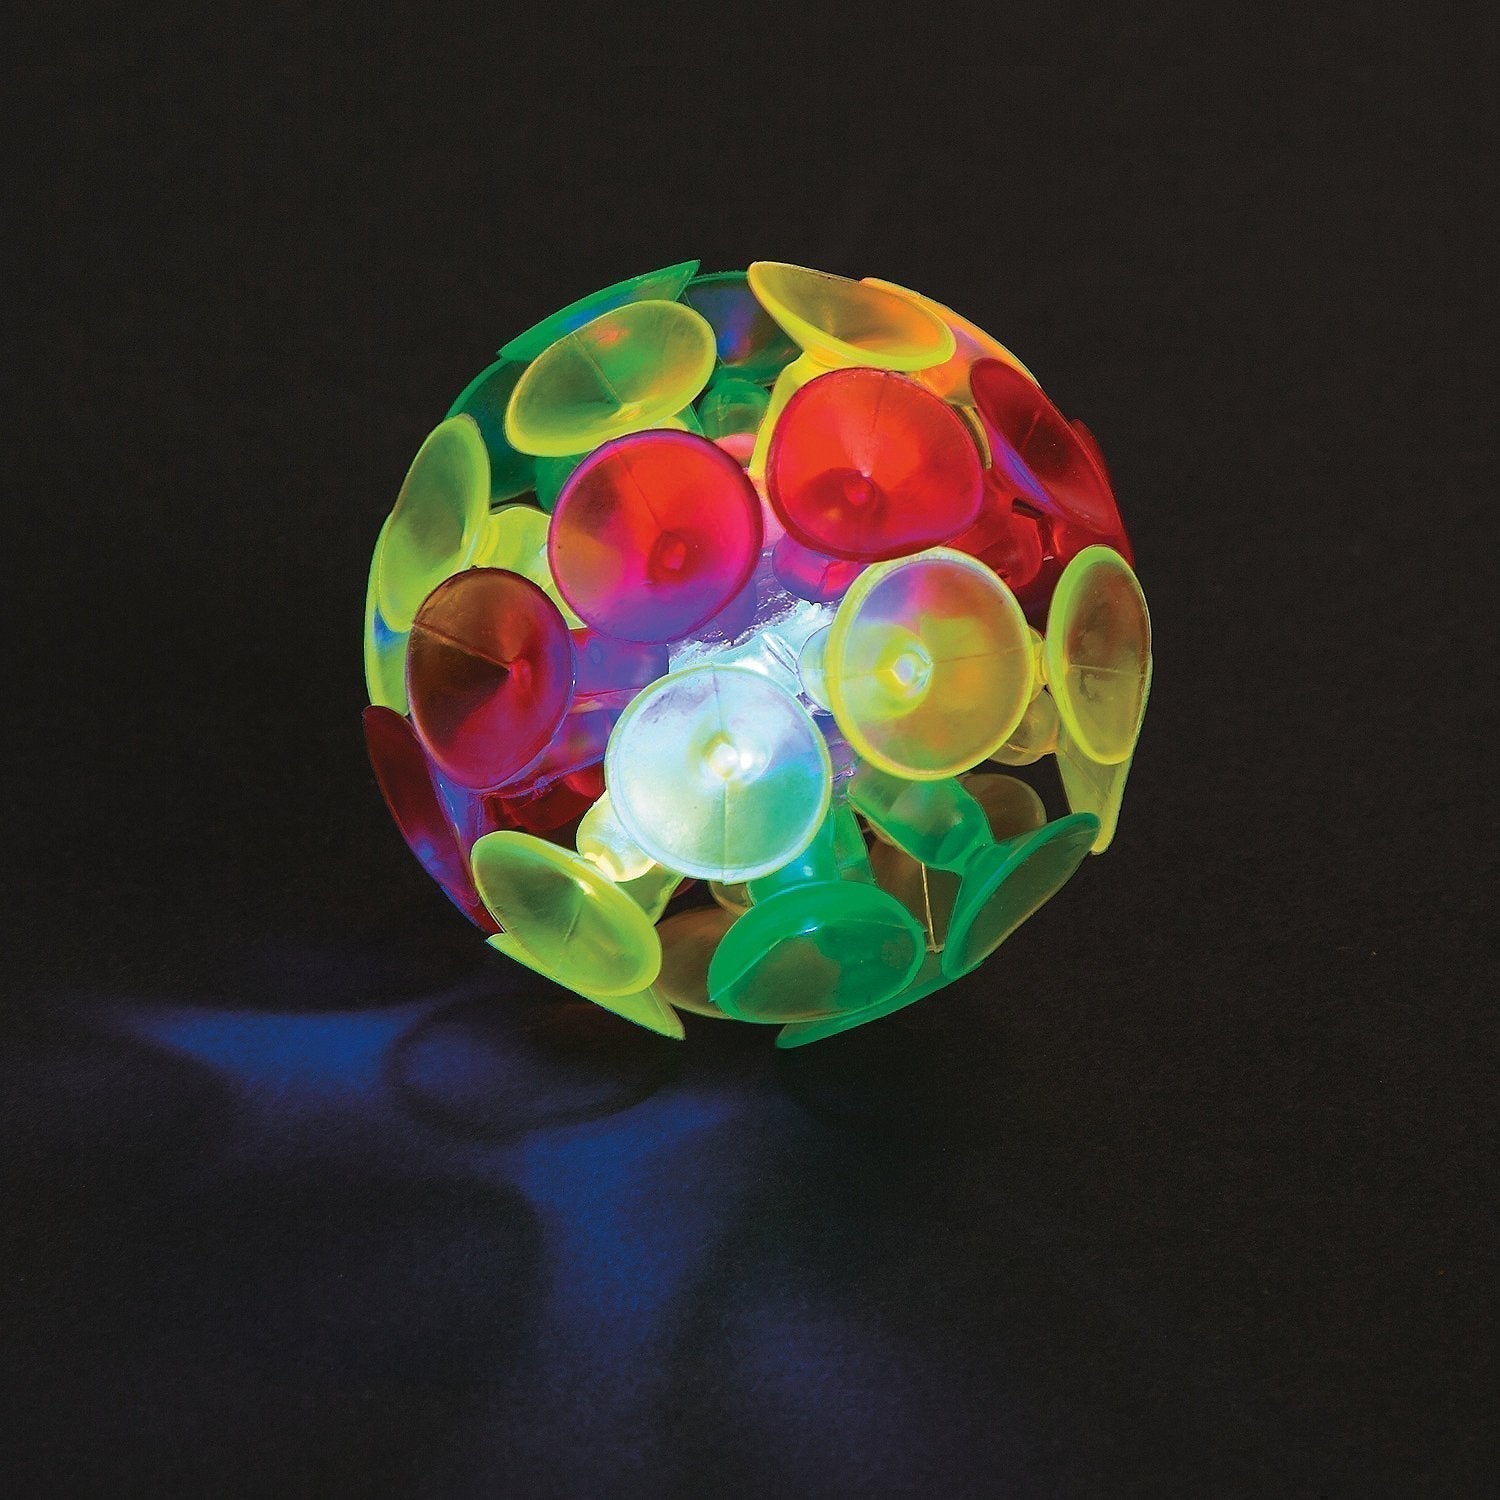 Light Up Sucker Ball, Toss this silly suction cup ball against a wall to make it smack! Watch the the lights flash for a spectacular show that really sticks with you! This Light Up Sucker Ball will keeps kids delightfully entertained. Expect plenty of giggles from the "popping" of each suction cup as it rolls down the wall.Soft and tactile, The Light Up Sucker Ball is ideal for all kinds of play engaging kids in sensory activity encouraging touch and providing visual stimulation. Make it bounce and stick it